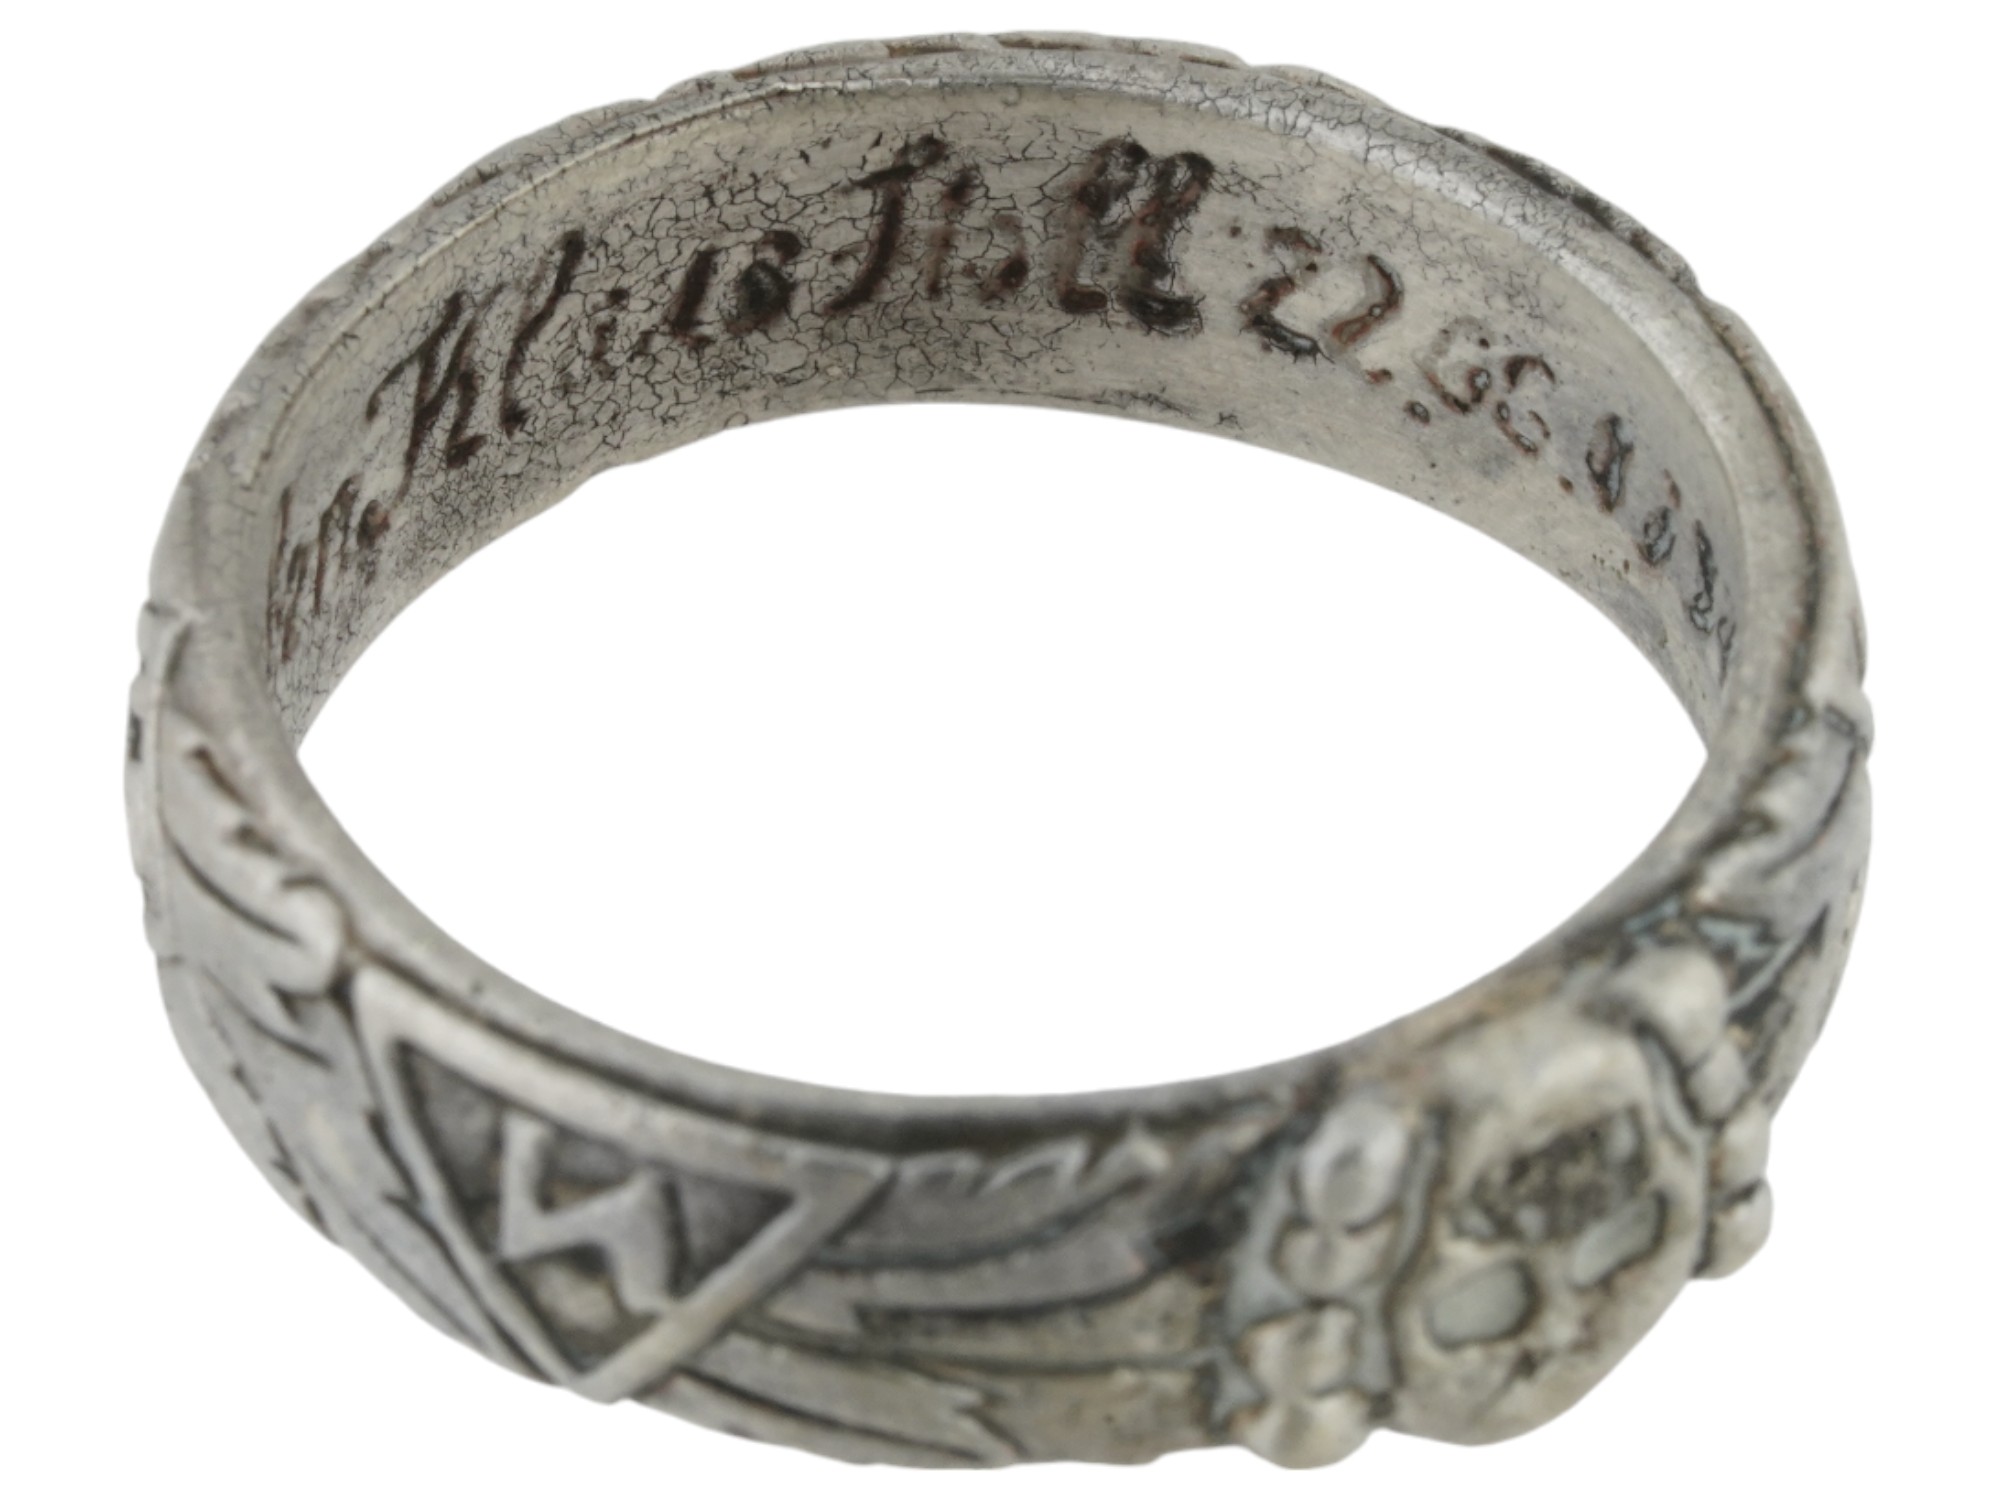 WWII NAZI GERMAN 3RD REICH SS HIMMLER HONOR TYPE RING PIC-2